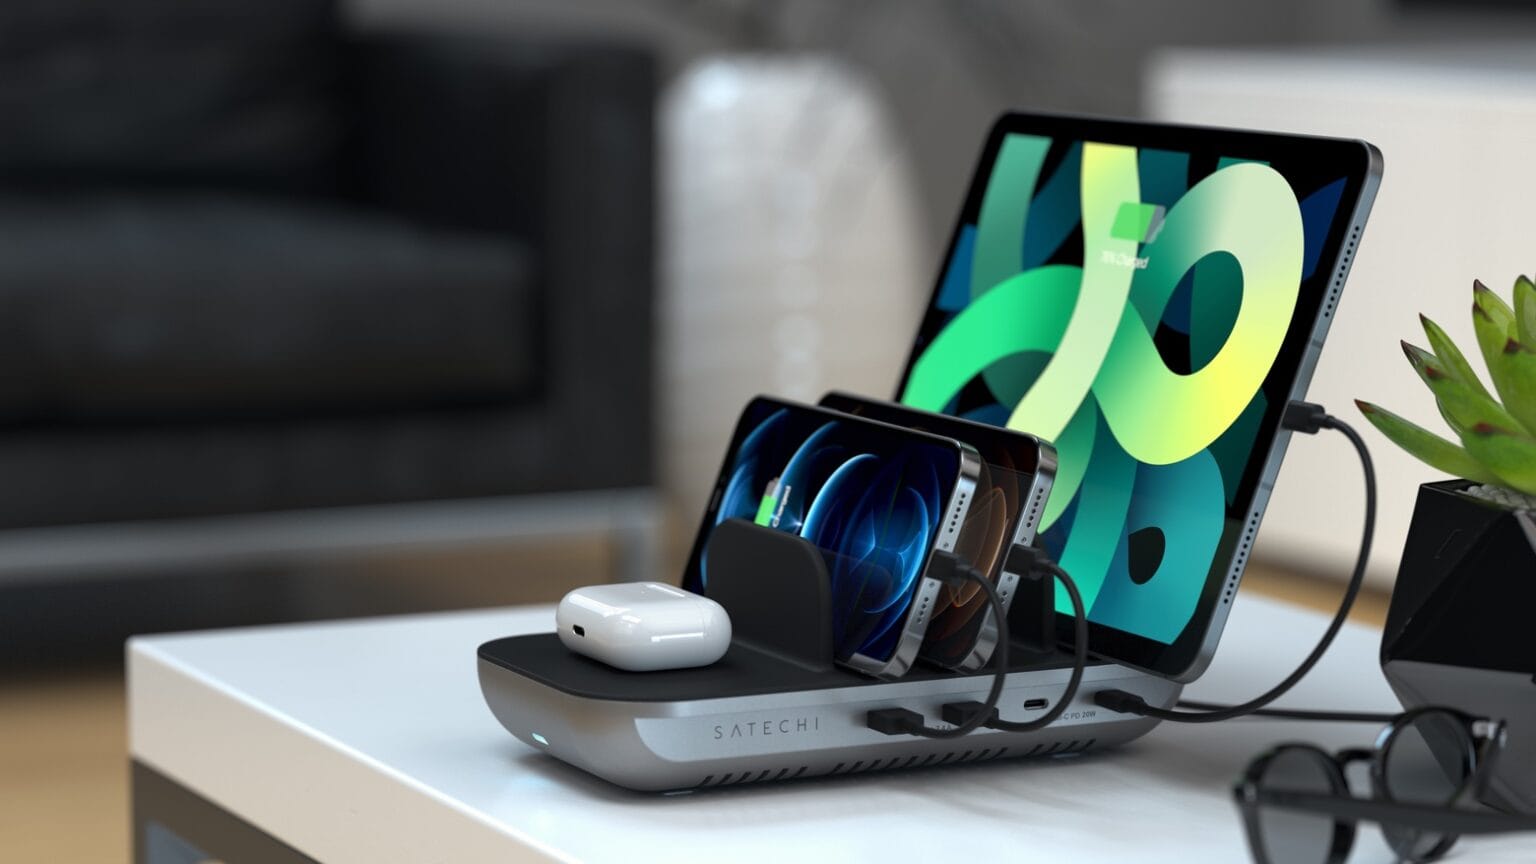 Satechi Dock5 Multi-Device Charging Station launched at CES 2021.